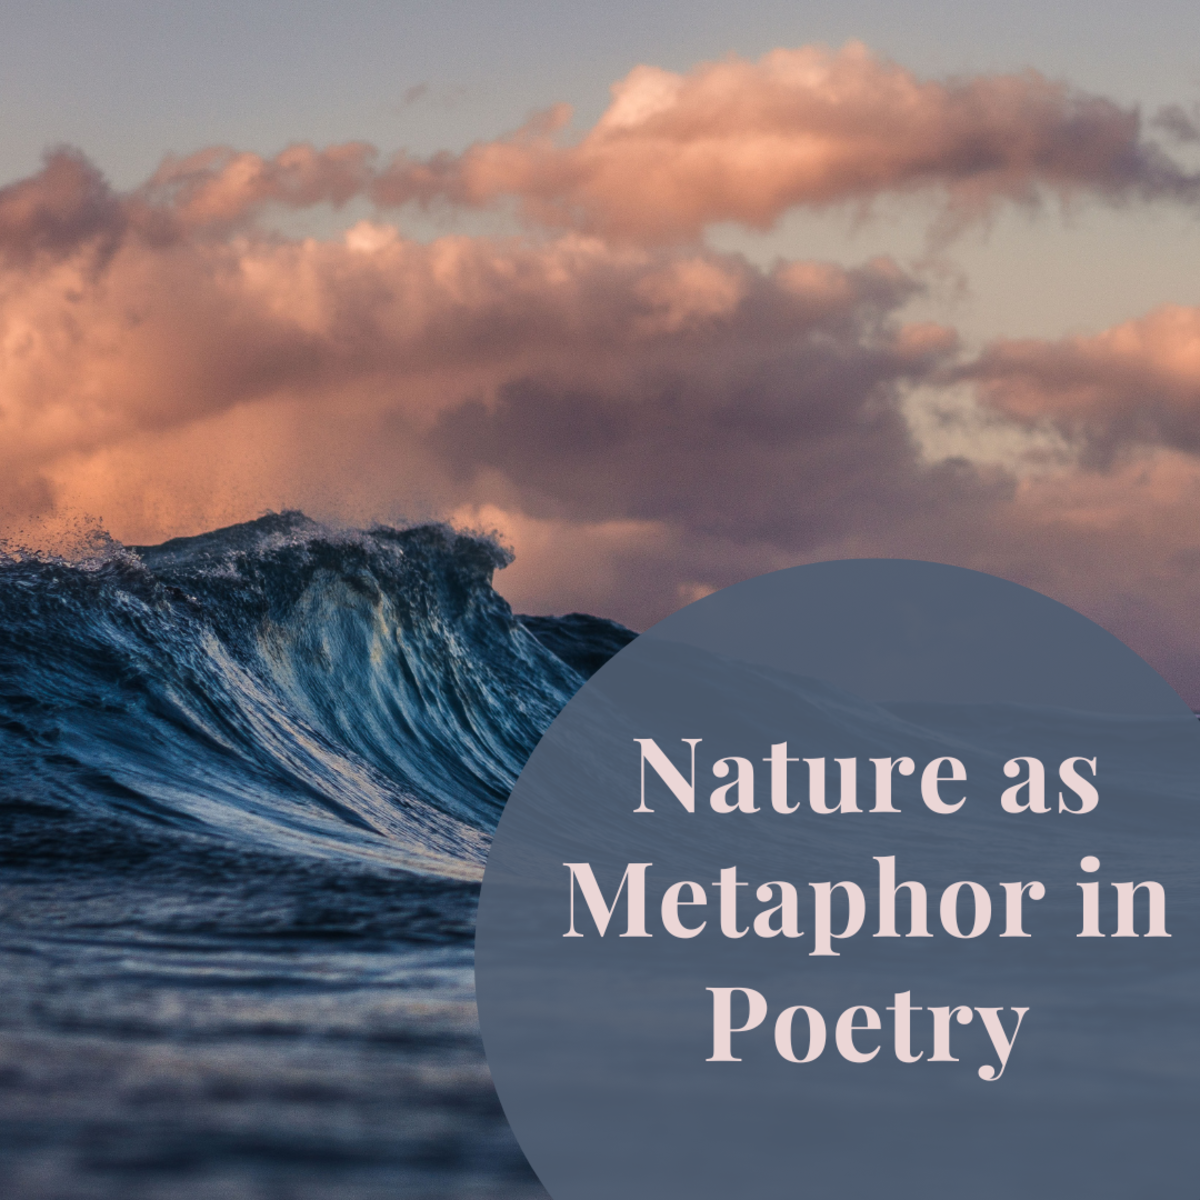 Natural elements pack a powerful metaphorical punch in poetry.